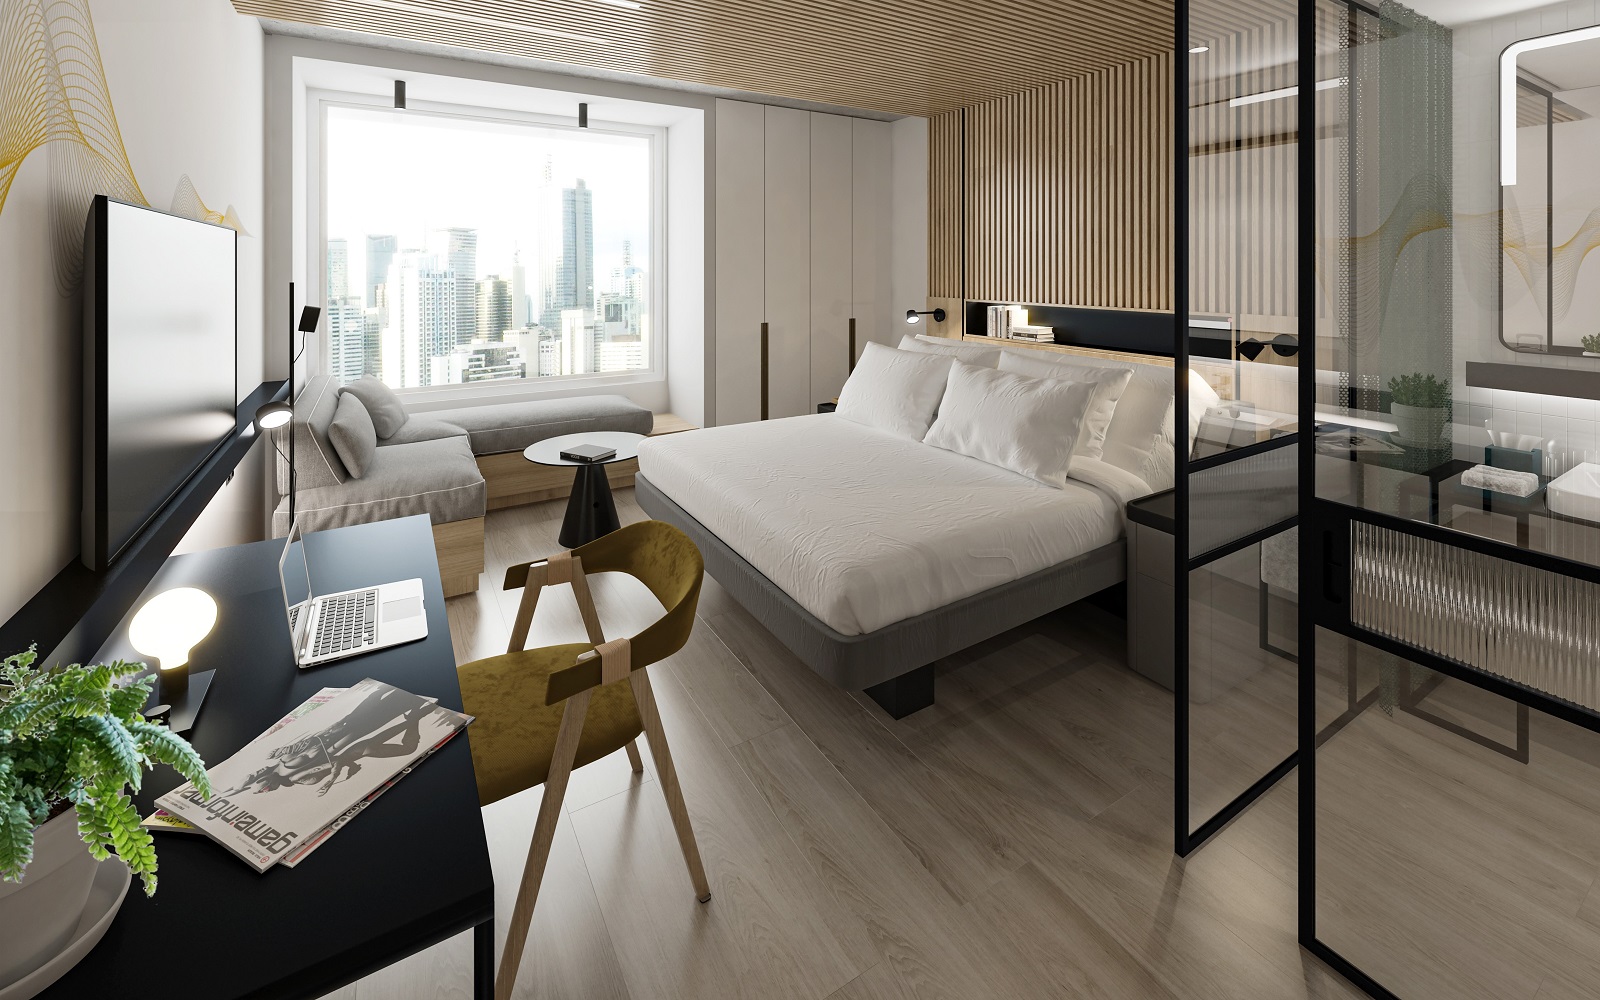 prototype guestroom design from YOTEL for YOTELPAD